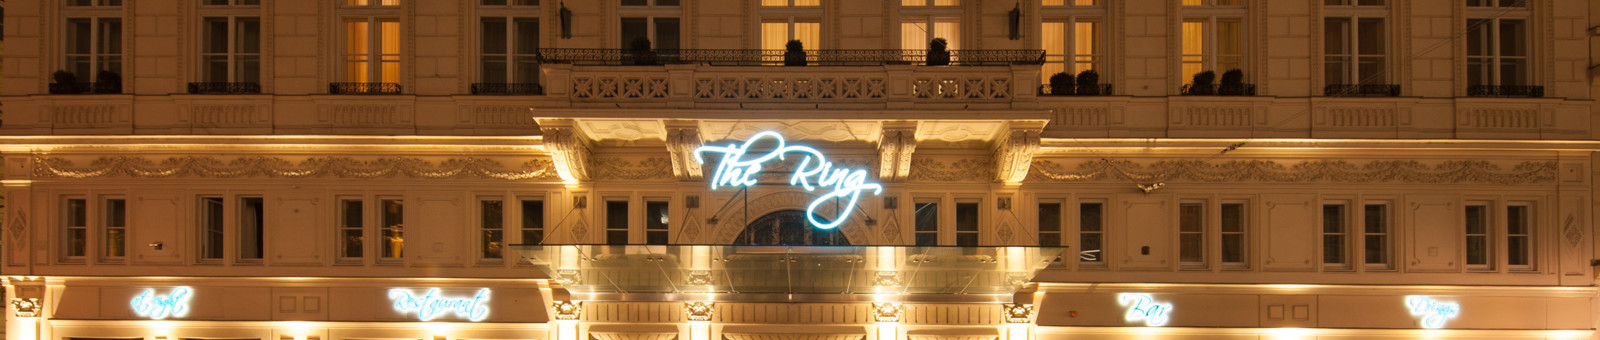     The Ring Hotel – Relais & Châteaux 